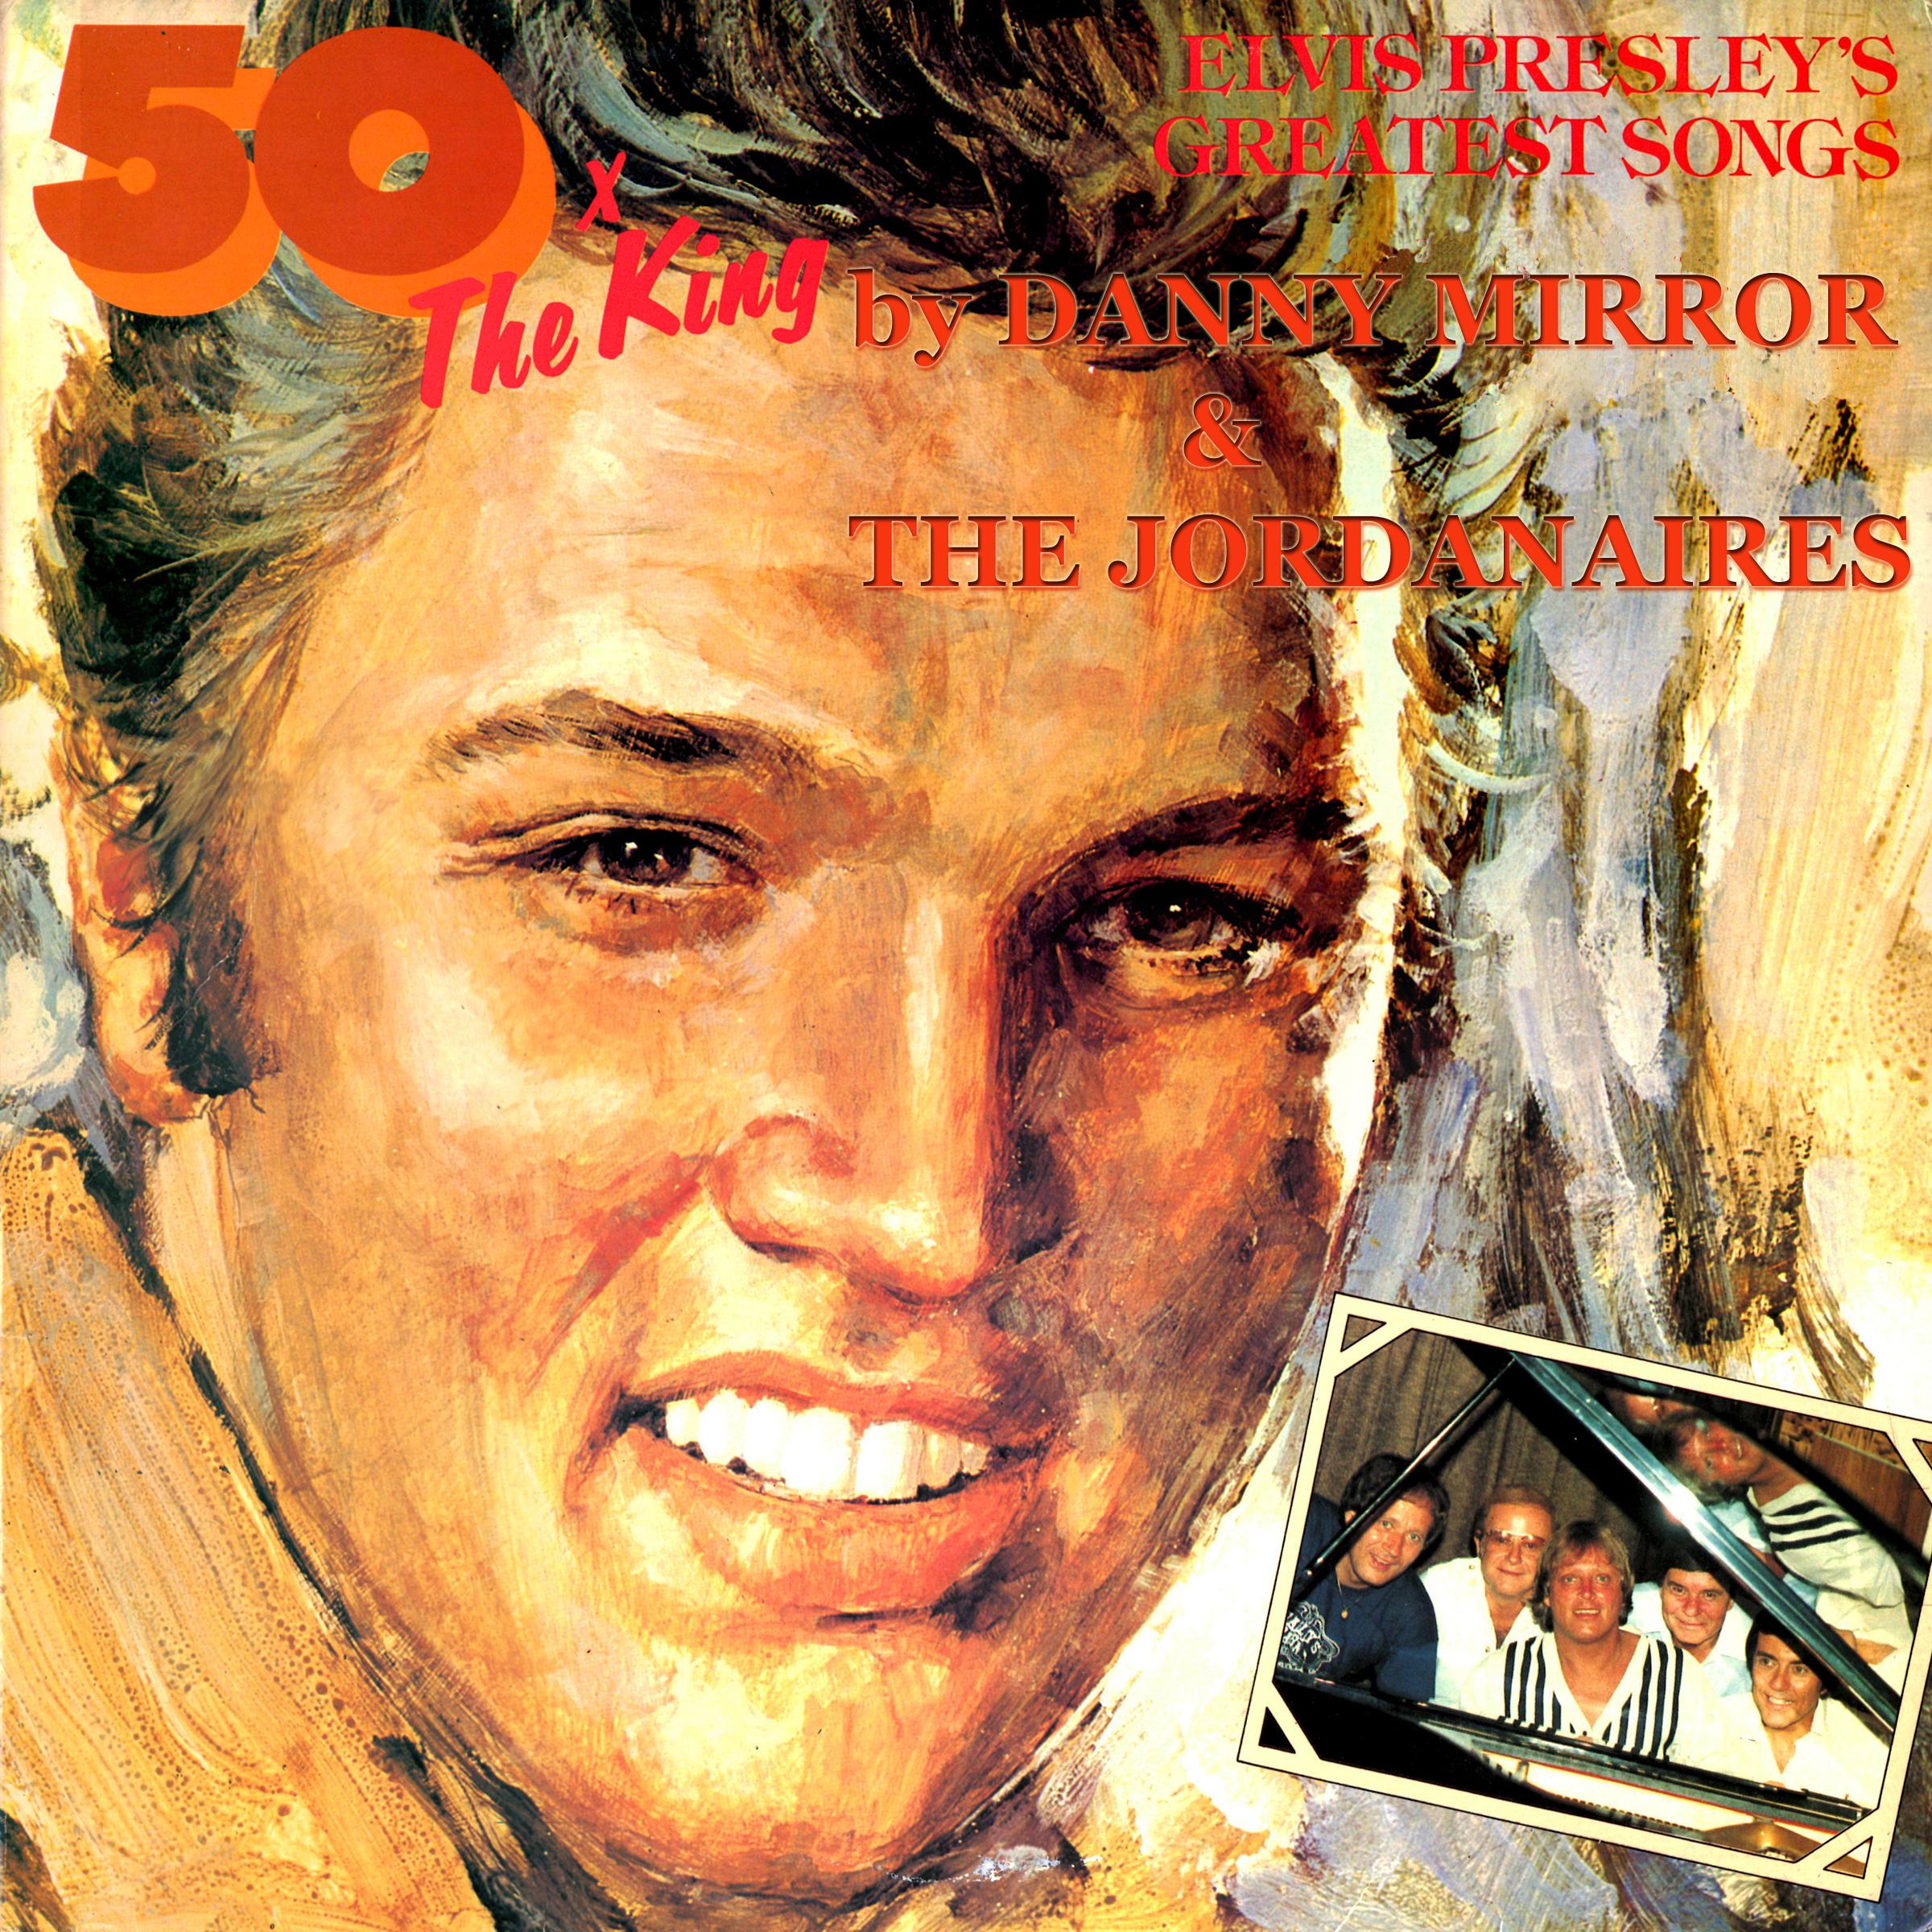 50 x The King - A Tribute to Elvis Presley's Greatest Songs